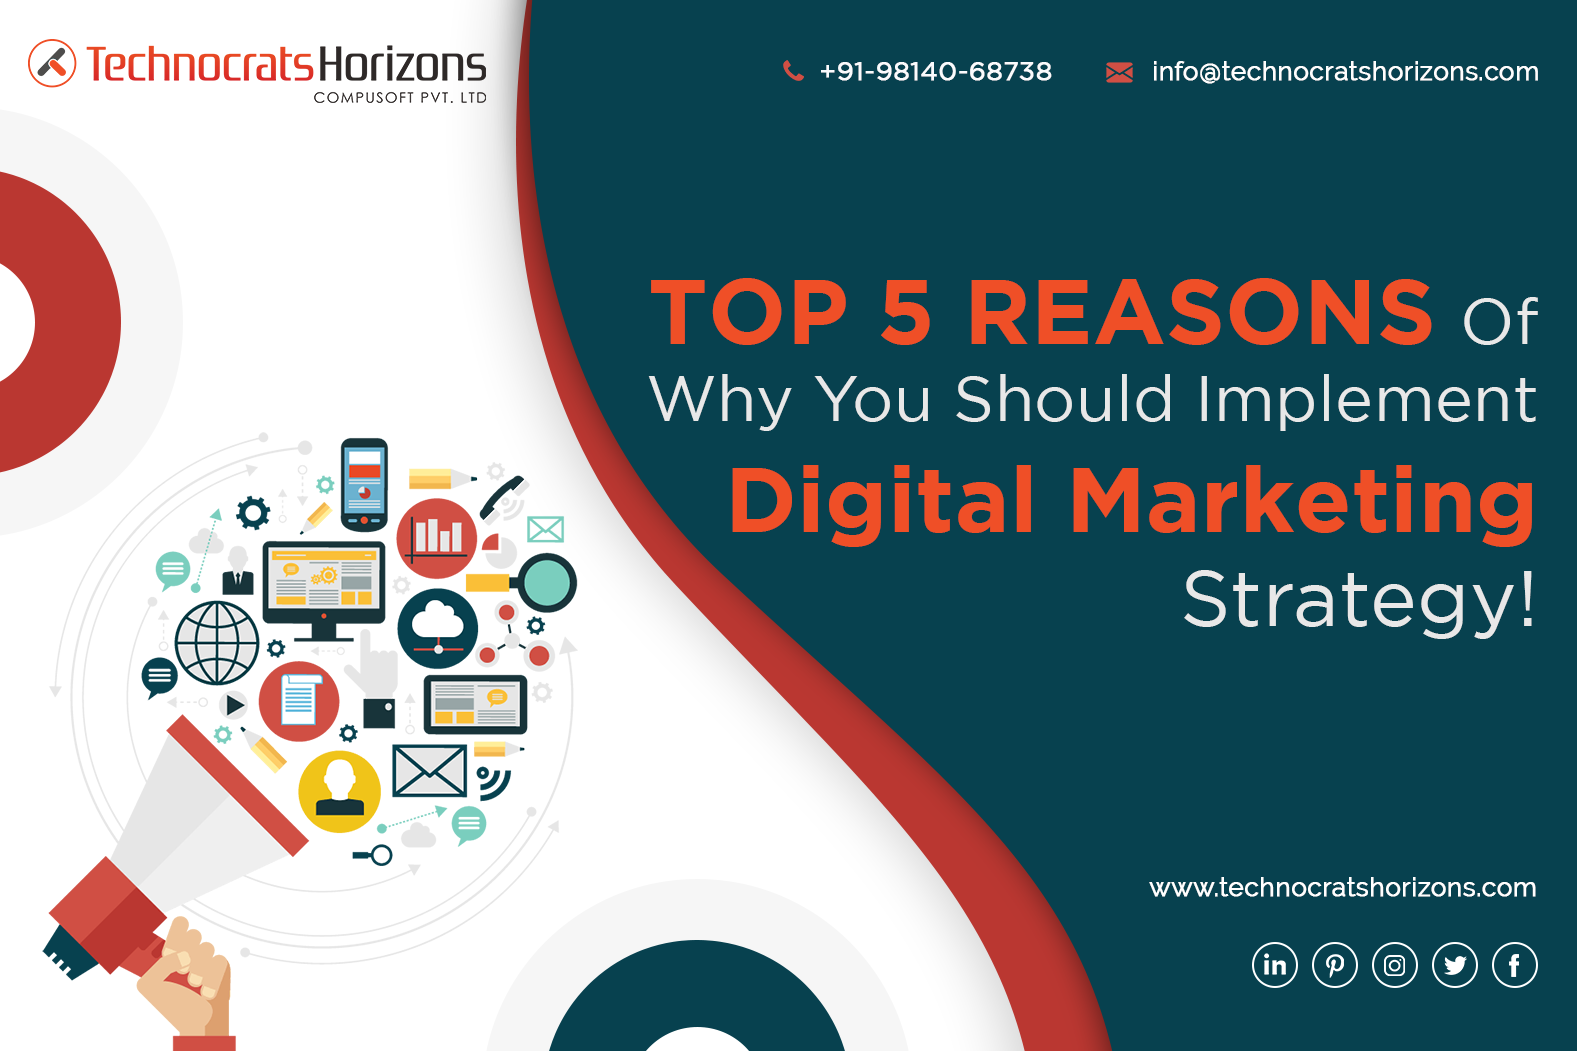 Top 5 Reasons Of Why You Should Implement Digital Marketing Strategy!